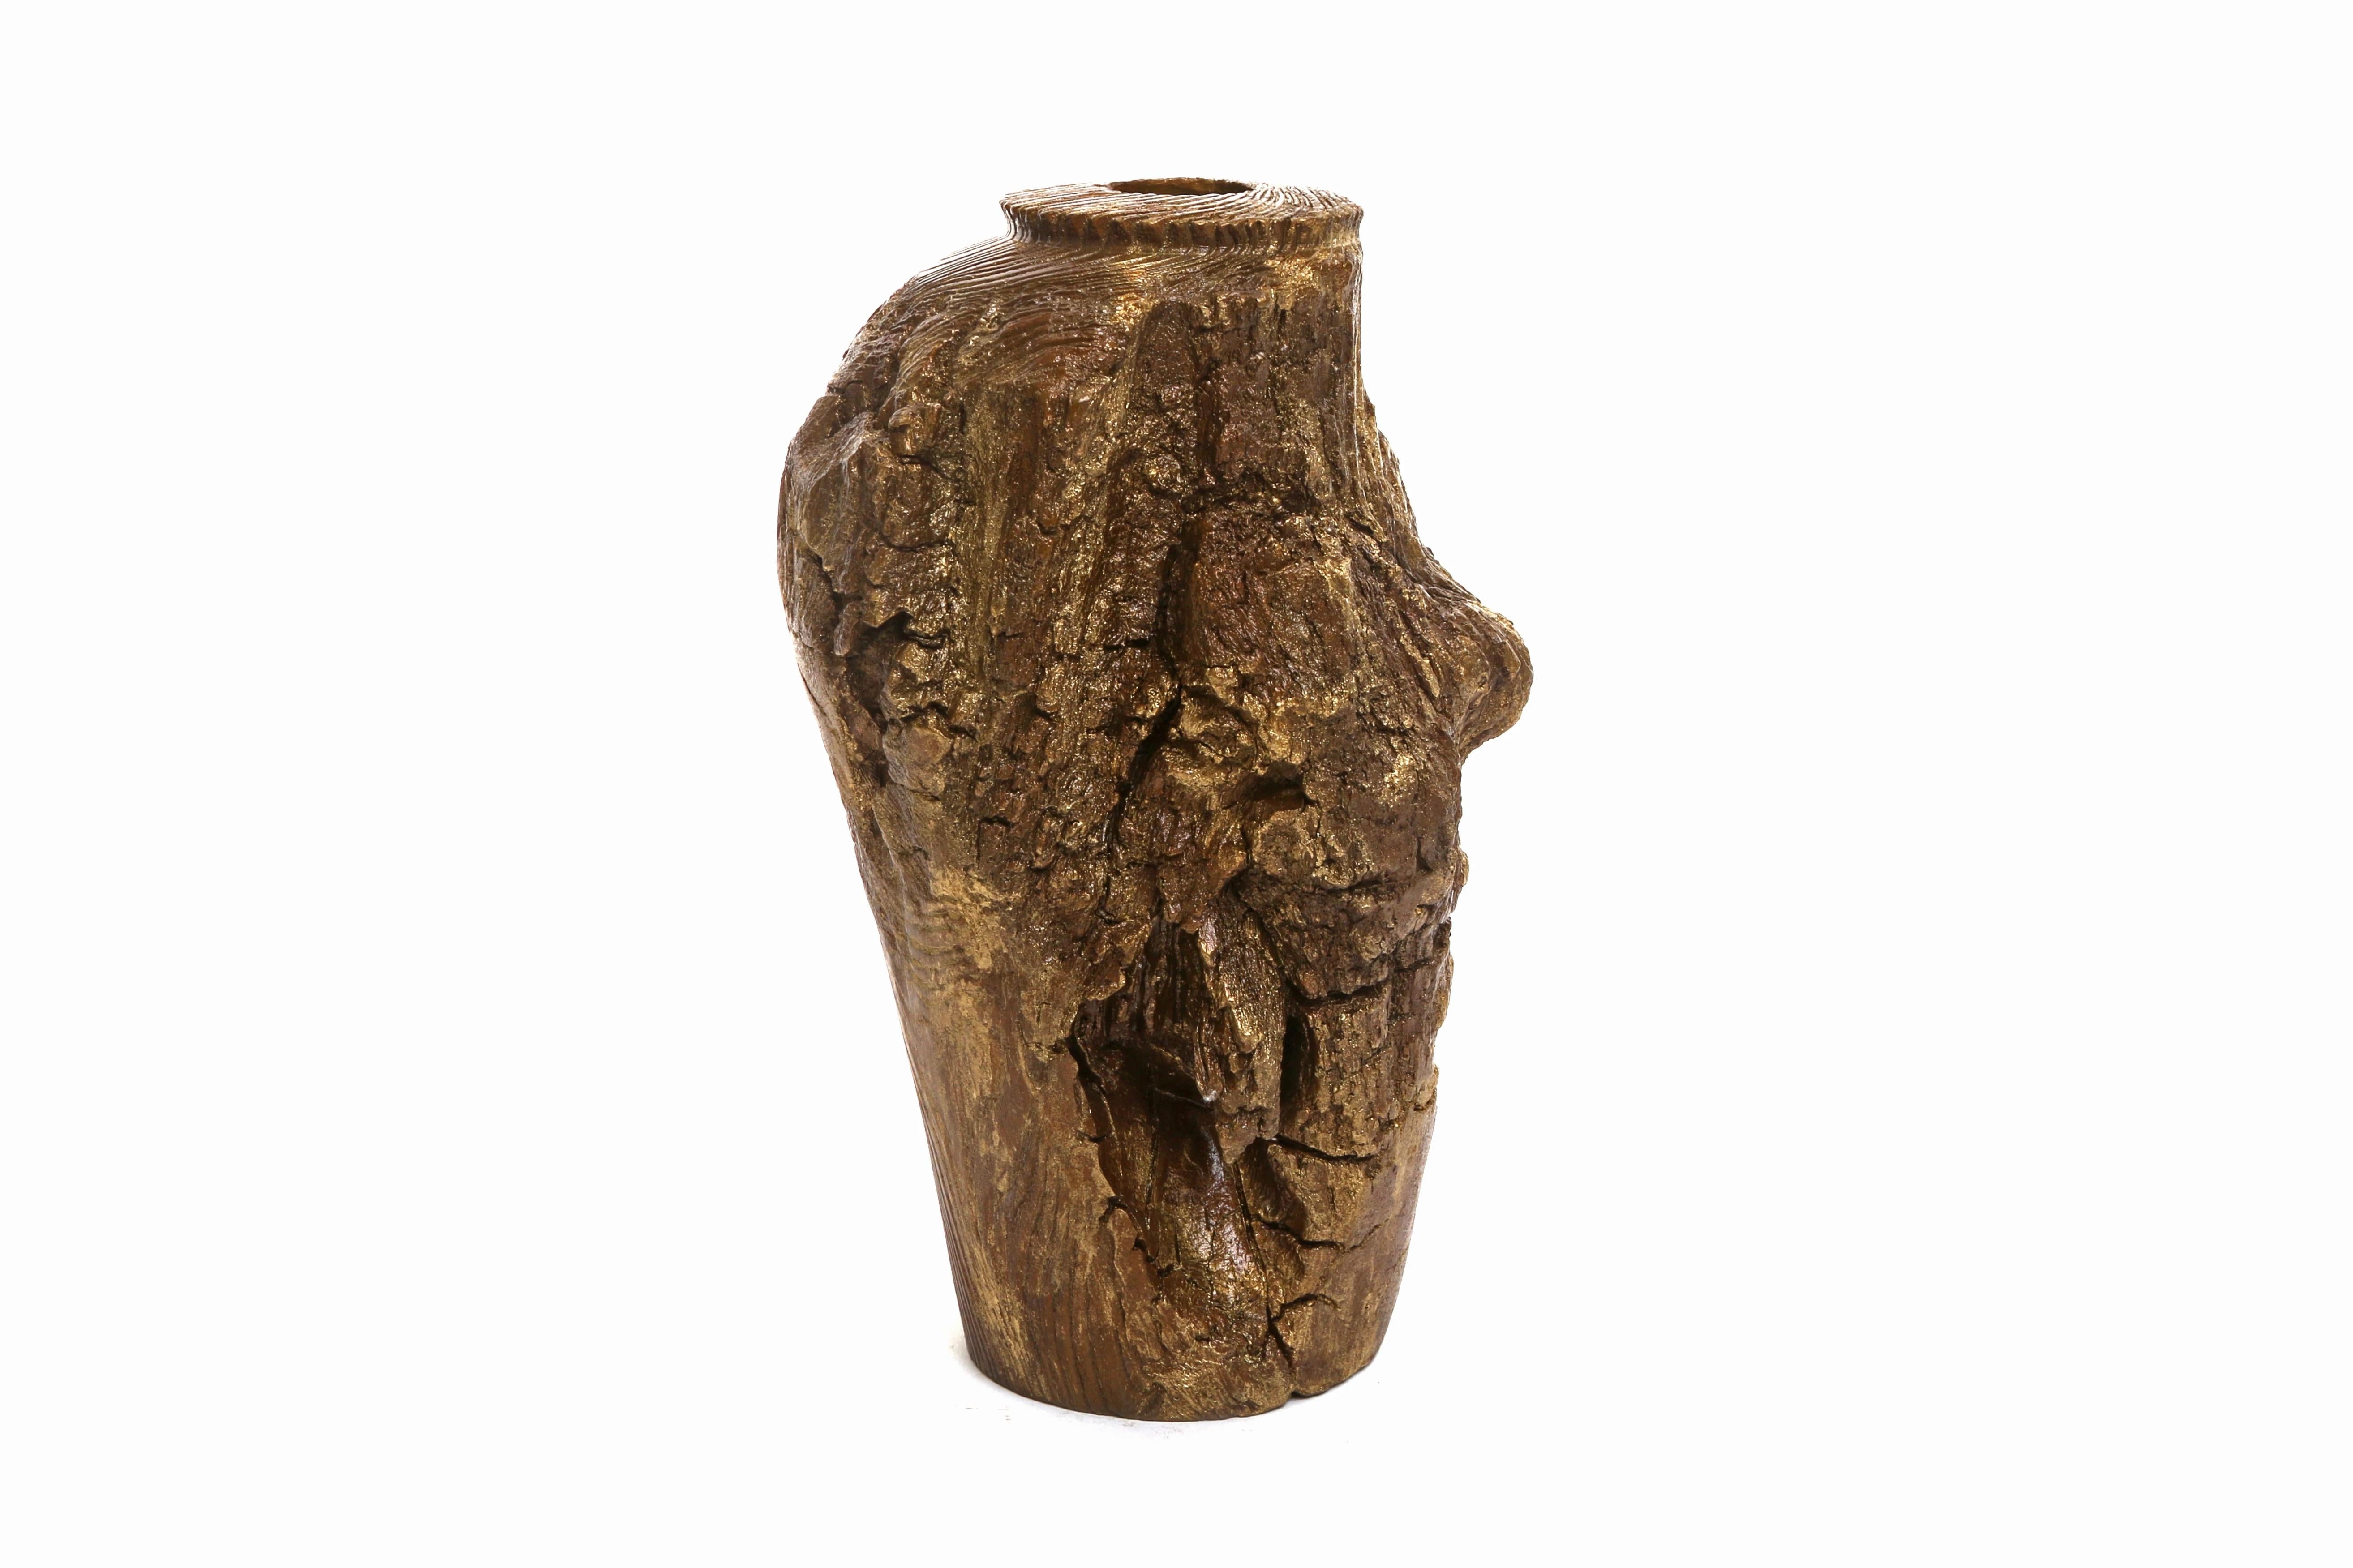 Cast from solid bronze, the Cliff Vase is a functional and sculptural work with Wood
Detail and Gold Patina.

Inspired by silhouettes found in nature, CHAABAN sought to create a line of unique bronzewares and premium home furnishings. Our collection